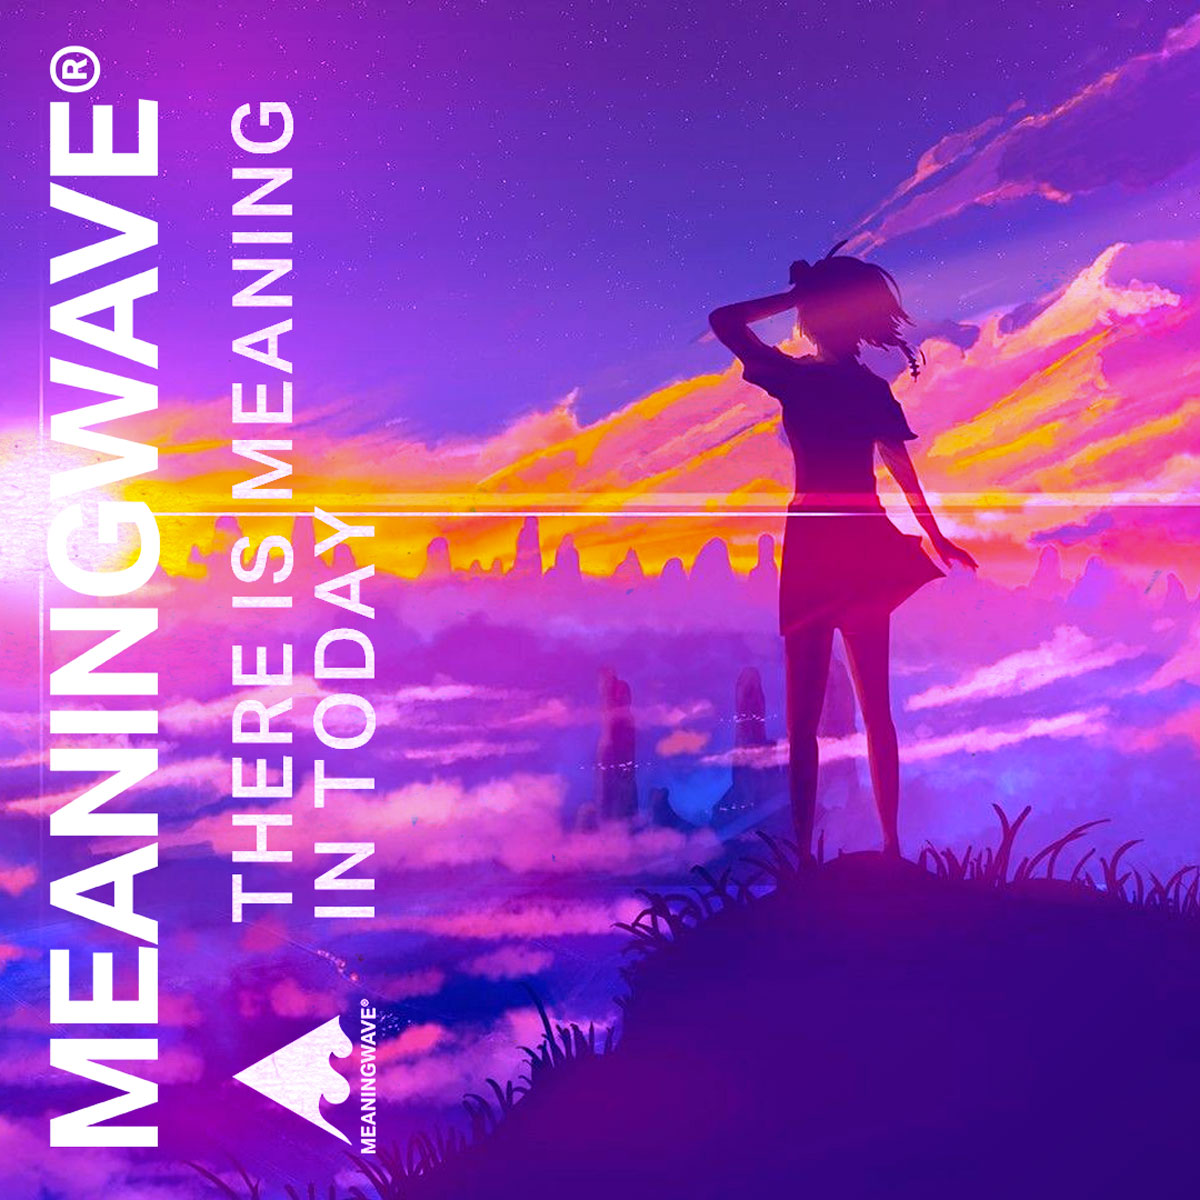 THERE IS MEANING IN TODAY | A Meaningwave Live Mix ft Joe Rogan, Alan Watts, Naval, Jocko Willink